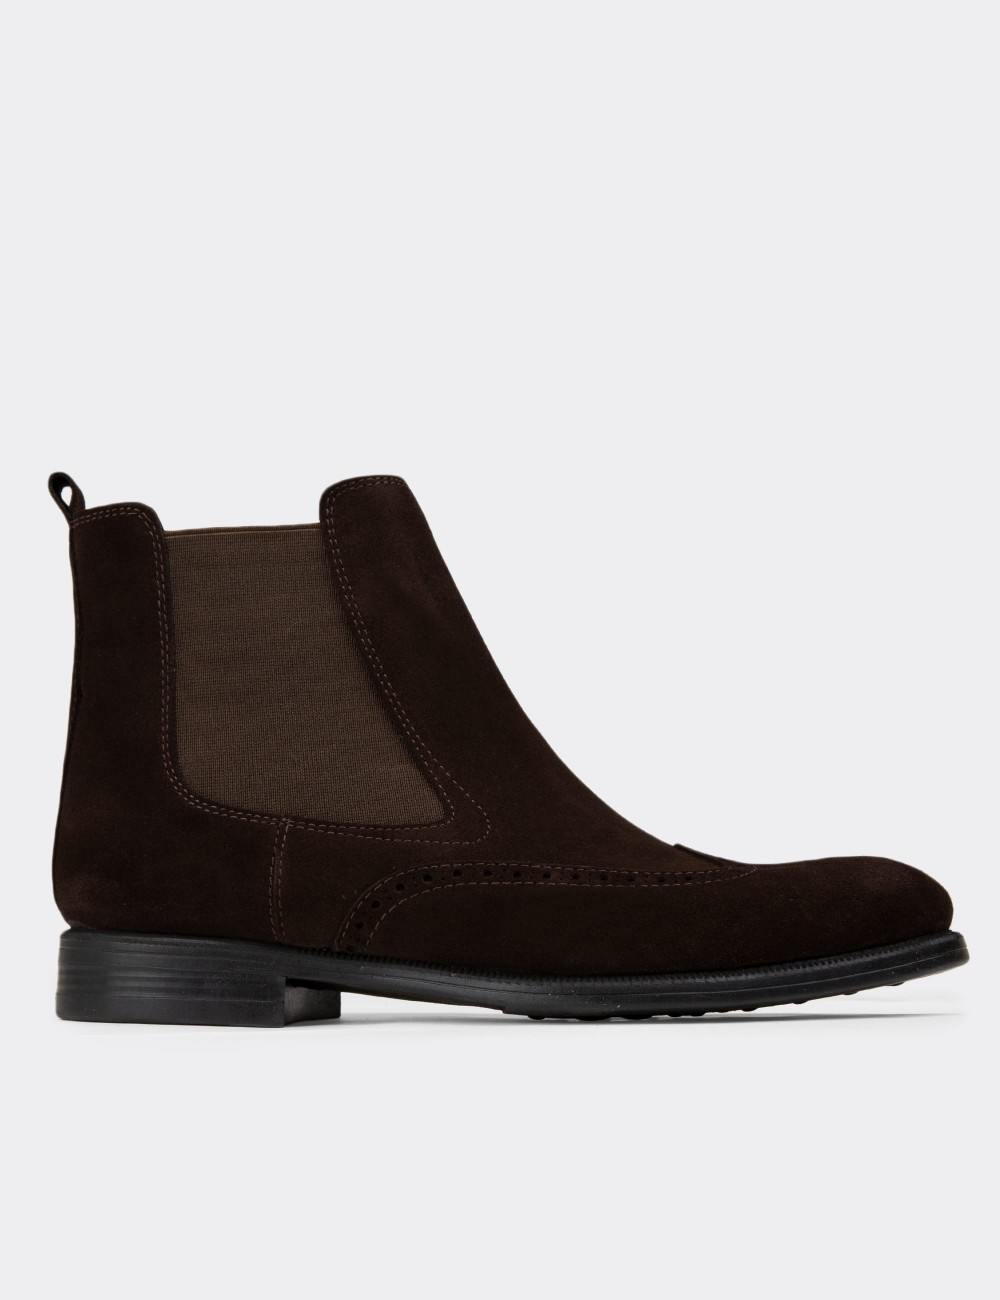 Brown Suede Leather Chelsea Boots - 01920MKHVC02